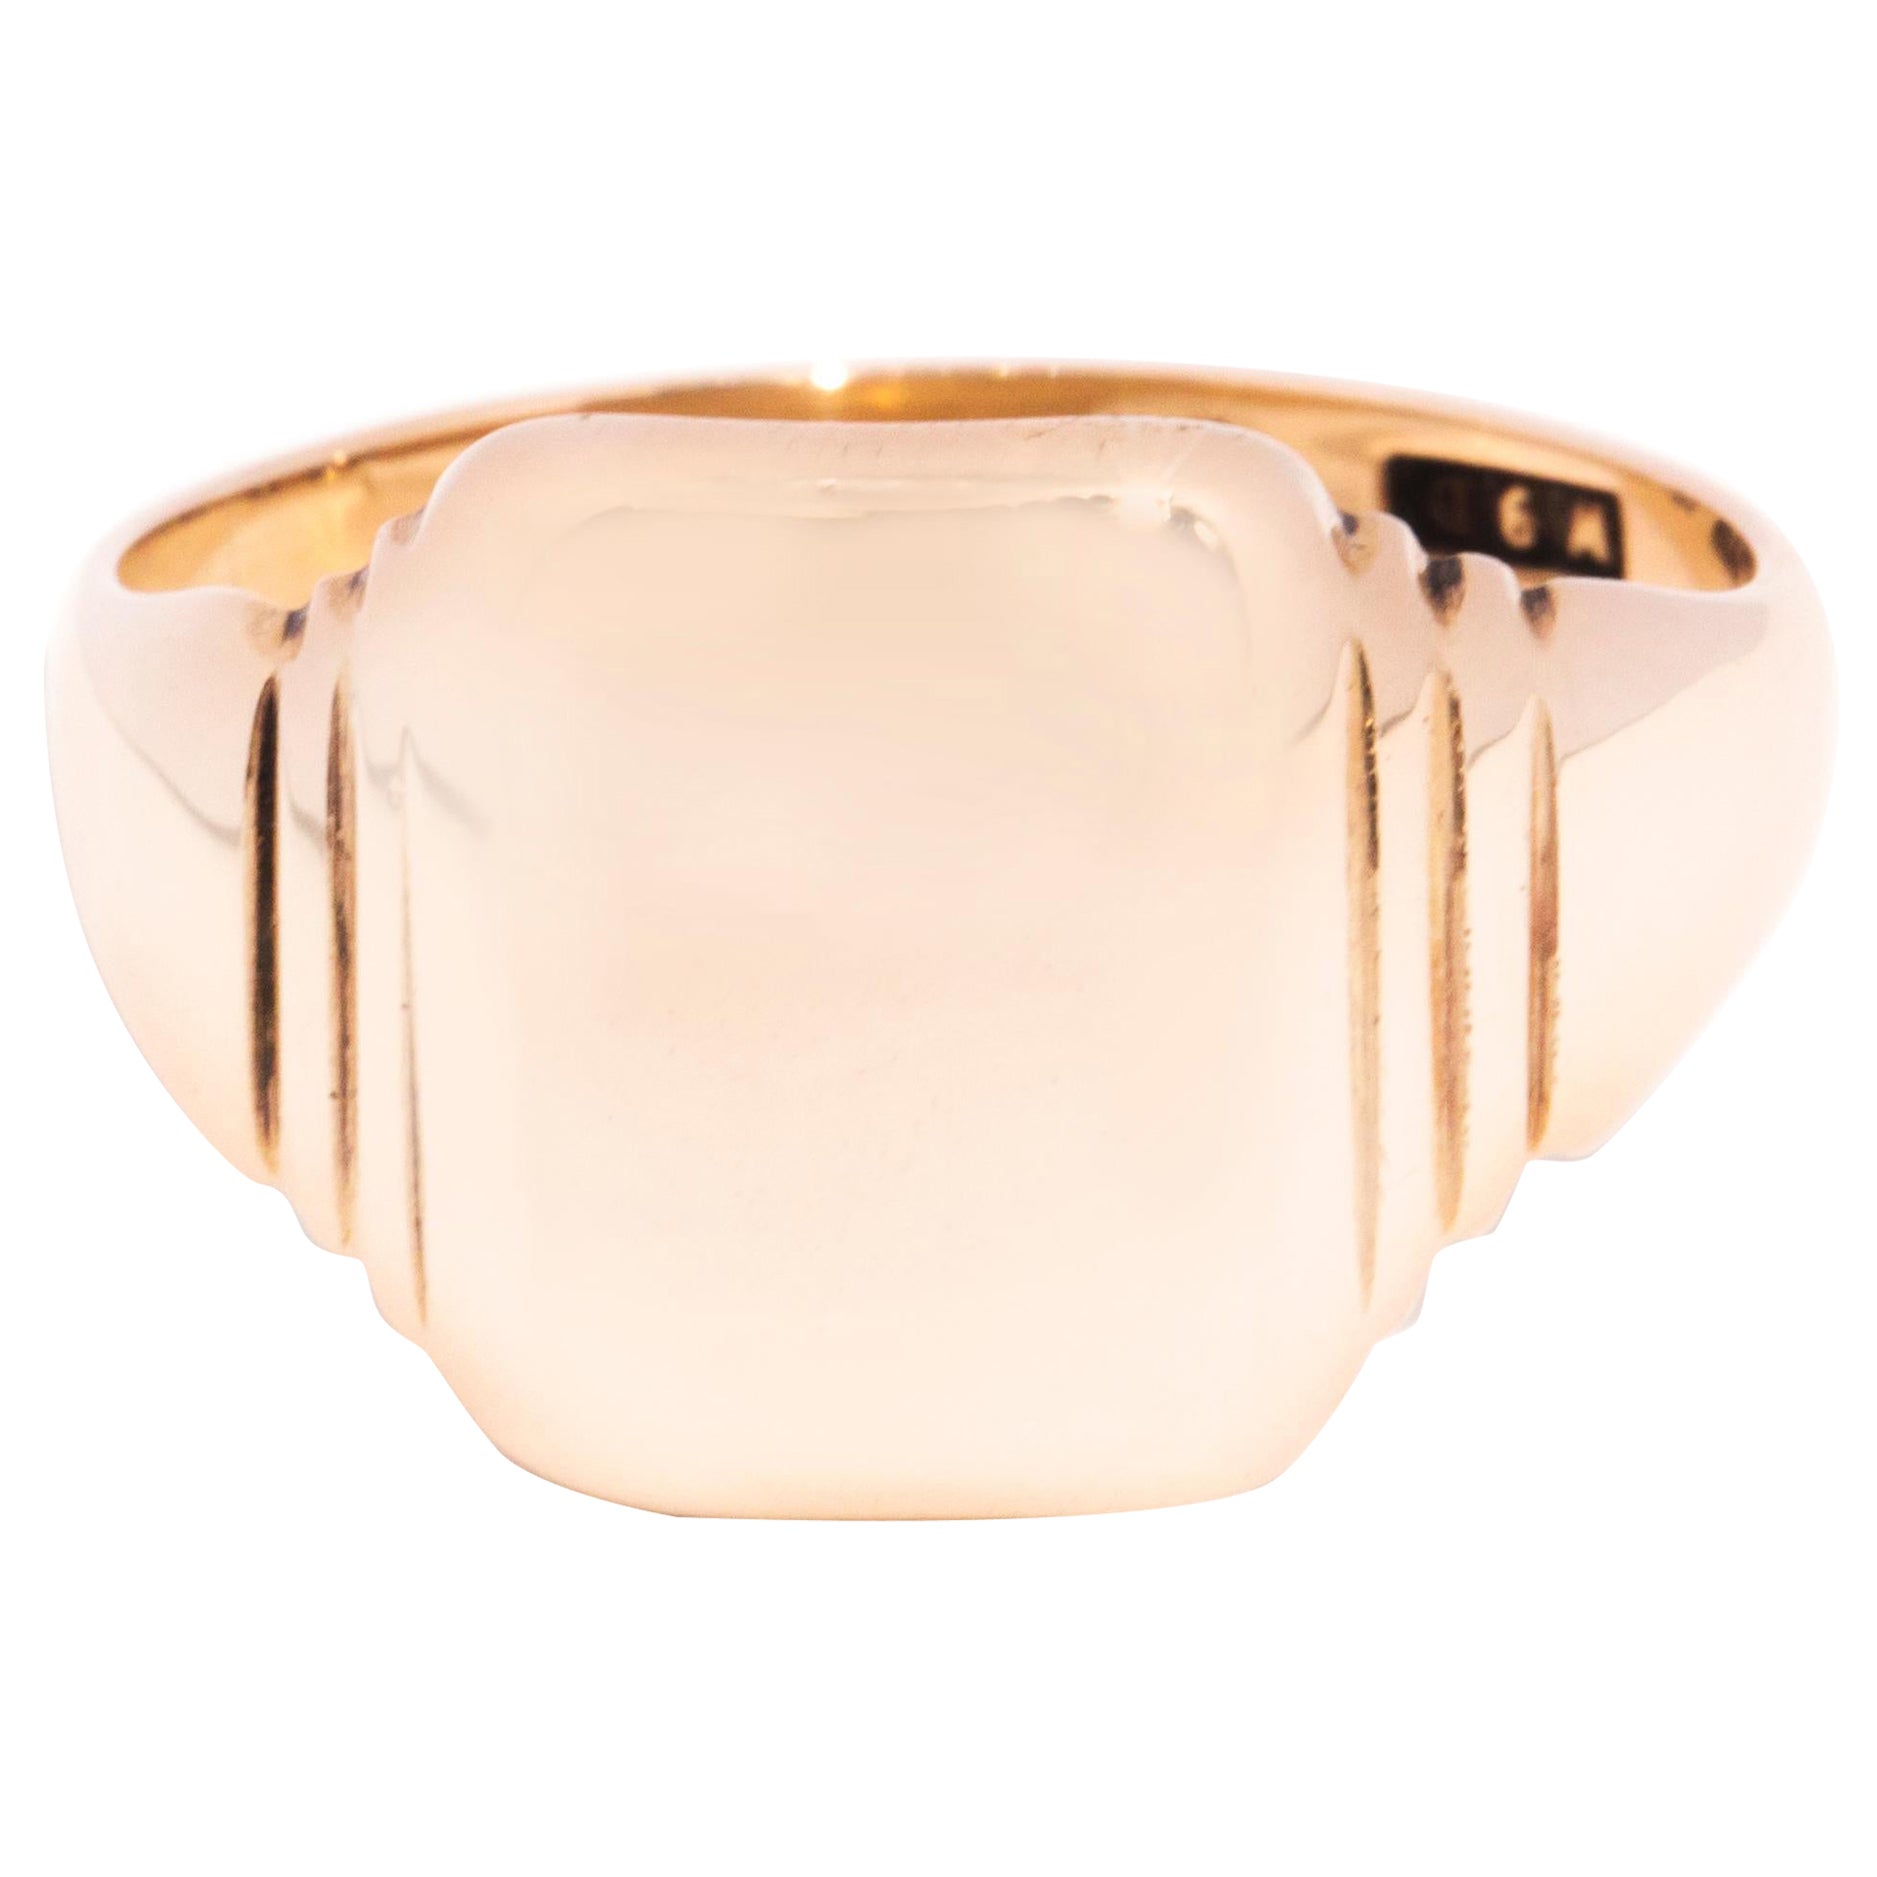 Circa 1970s 9 Carat Rose Gold Mens Rectangle Shaped Unengraved Signet Ring For Sale